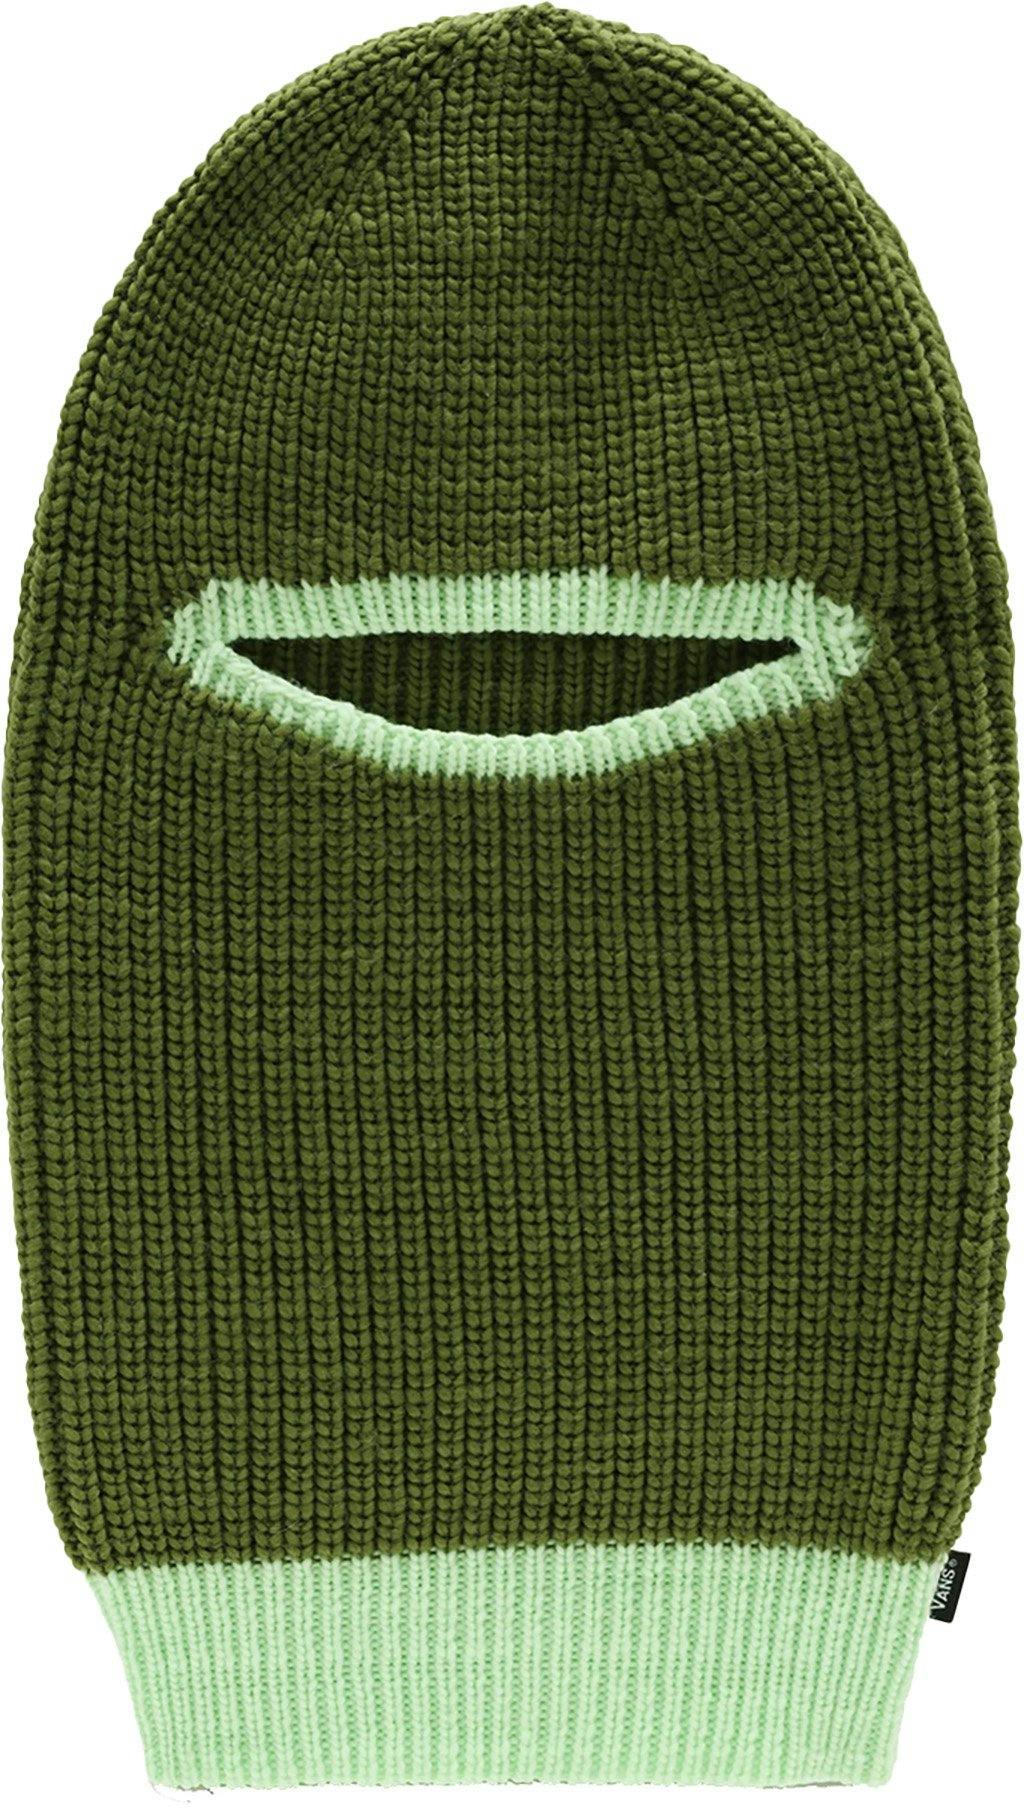 Product image for Fully Covered Beanie